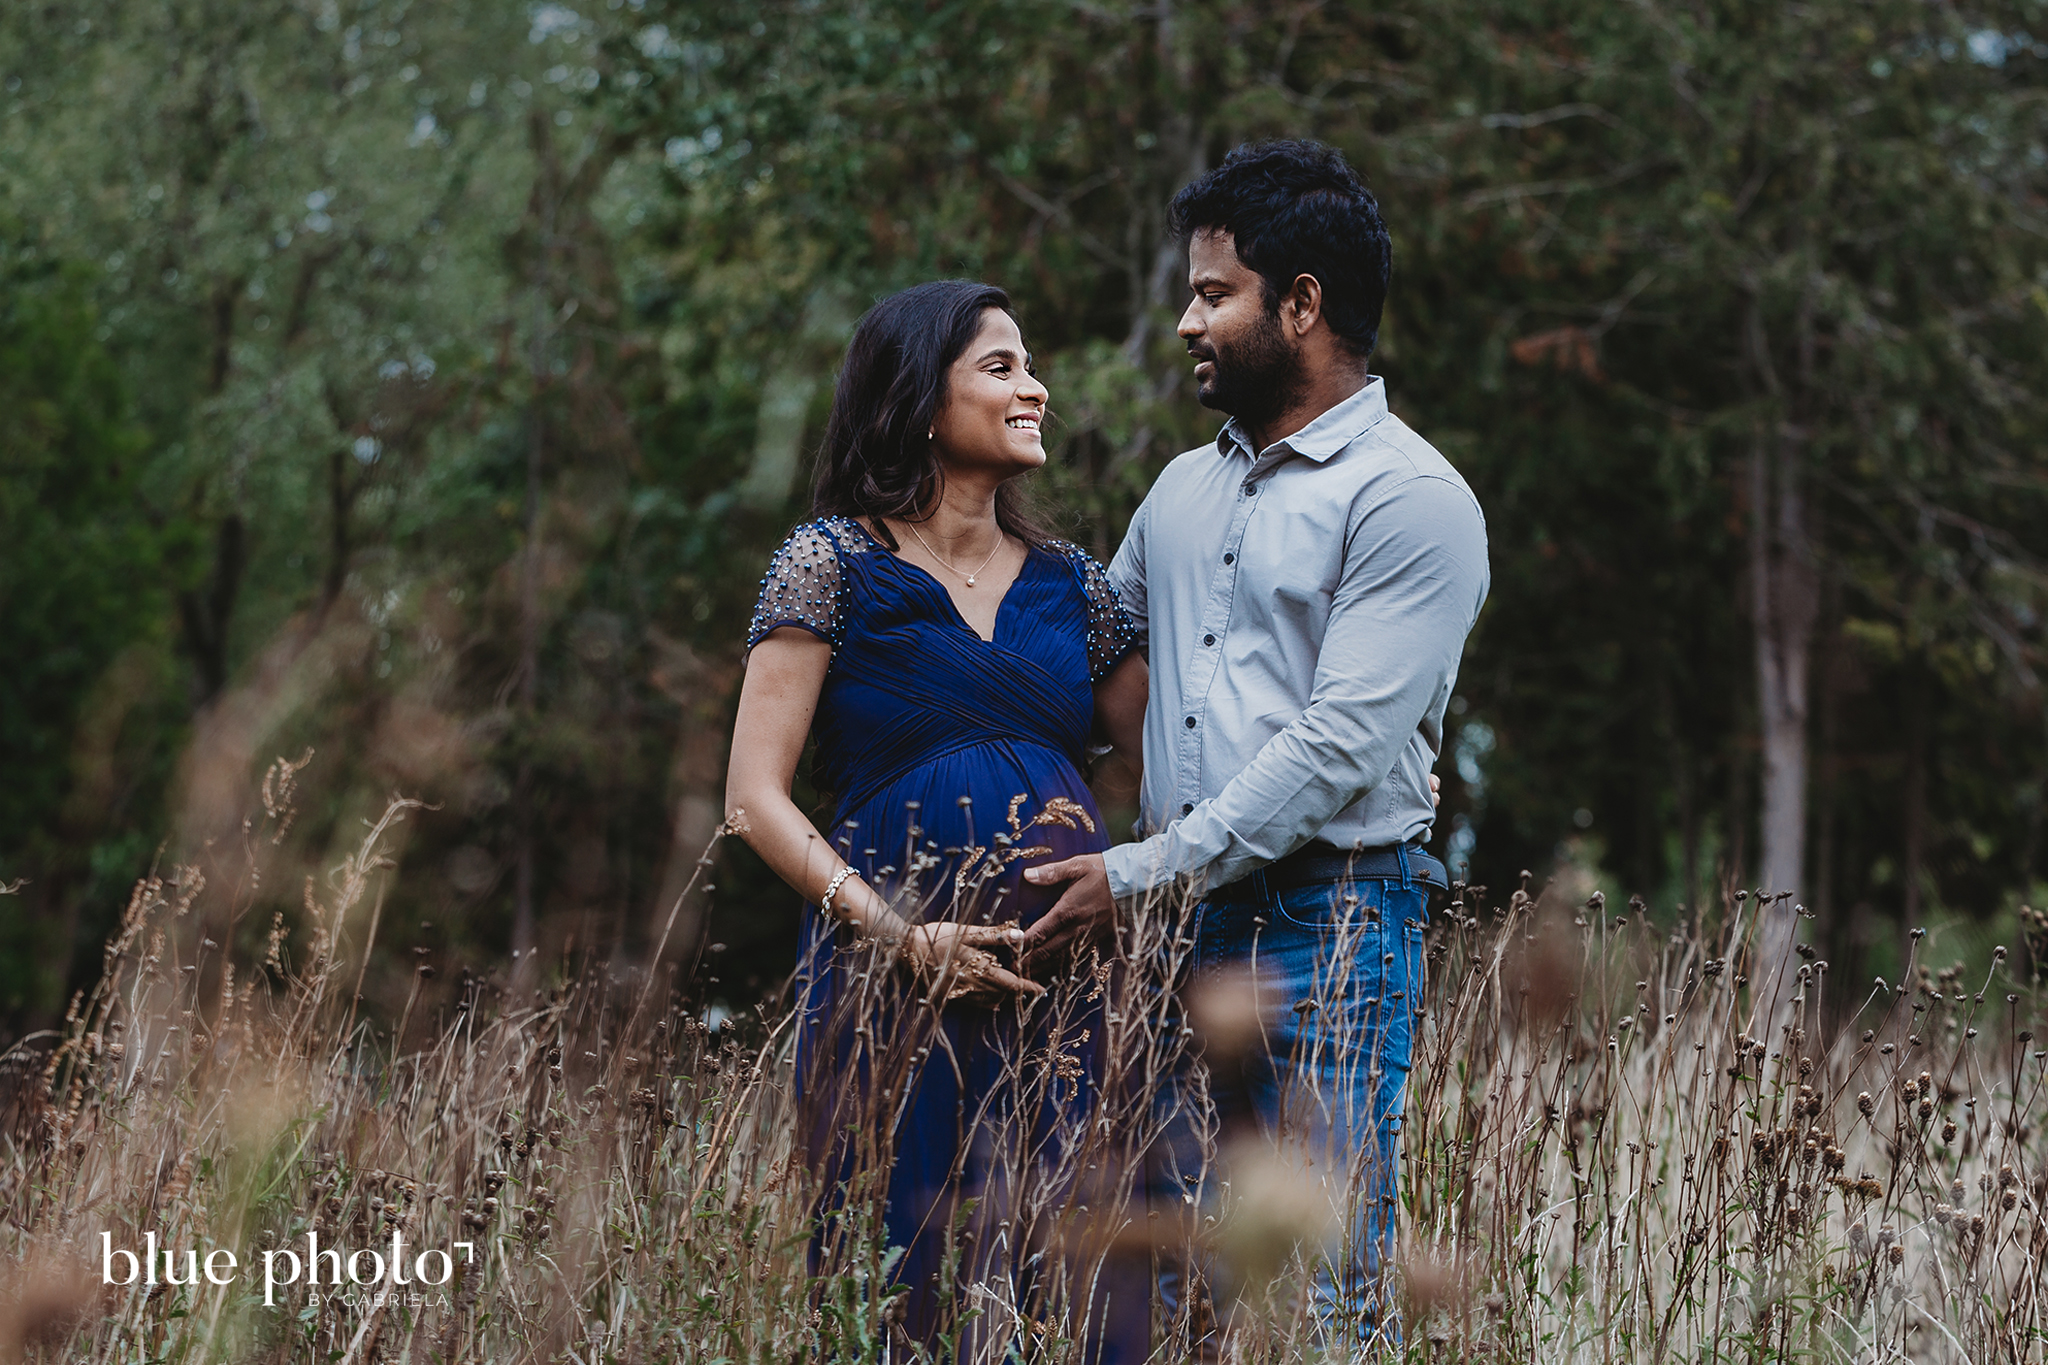 Socially distanced maternity session in West London. The couple is looking at each other and smiling. 